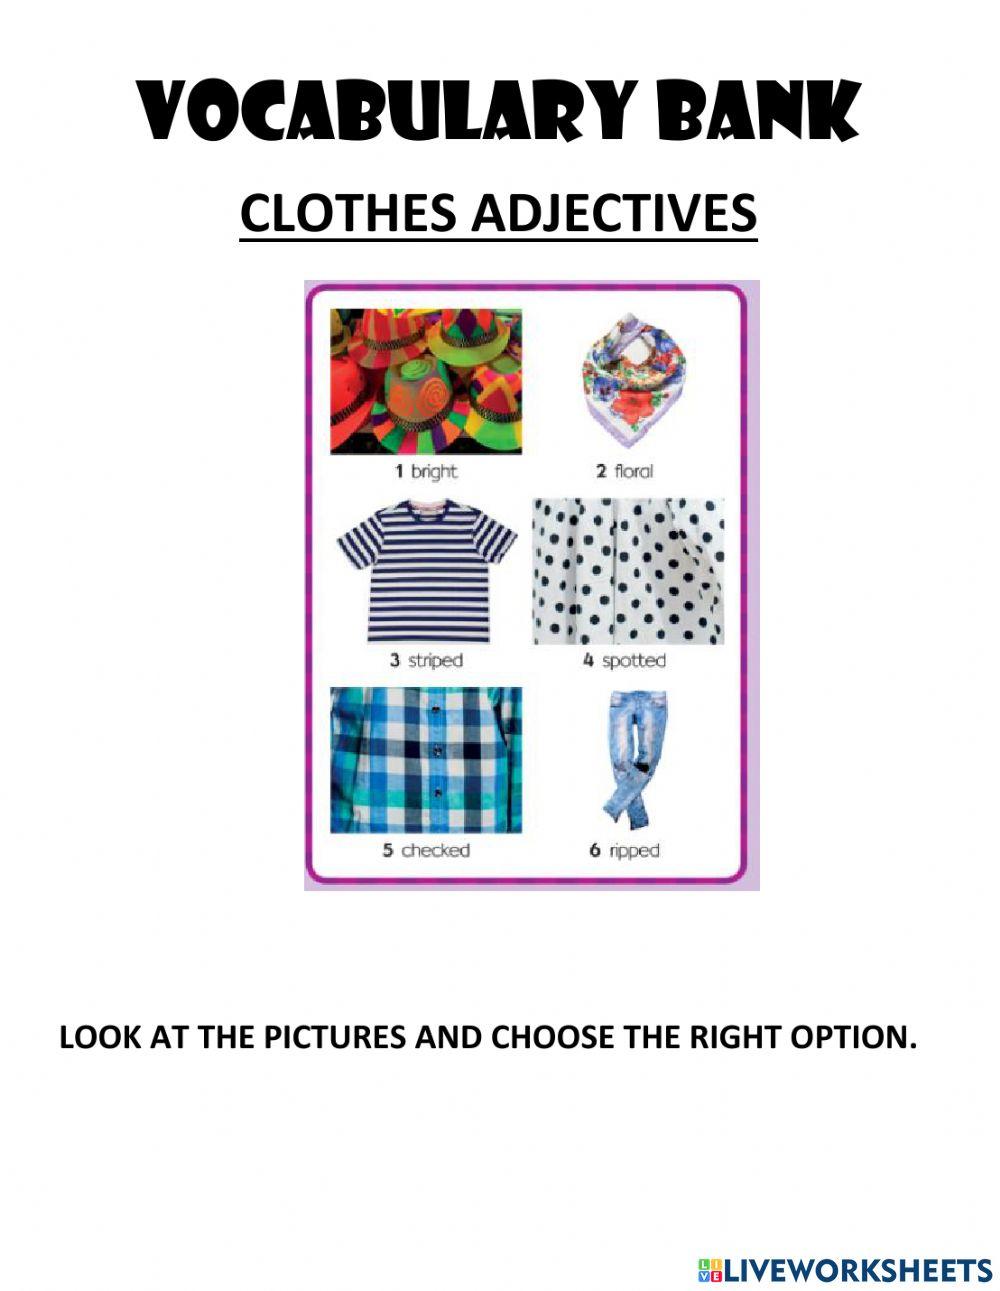 Vocabulary bank - clothes adjectives